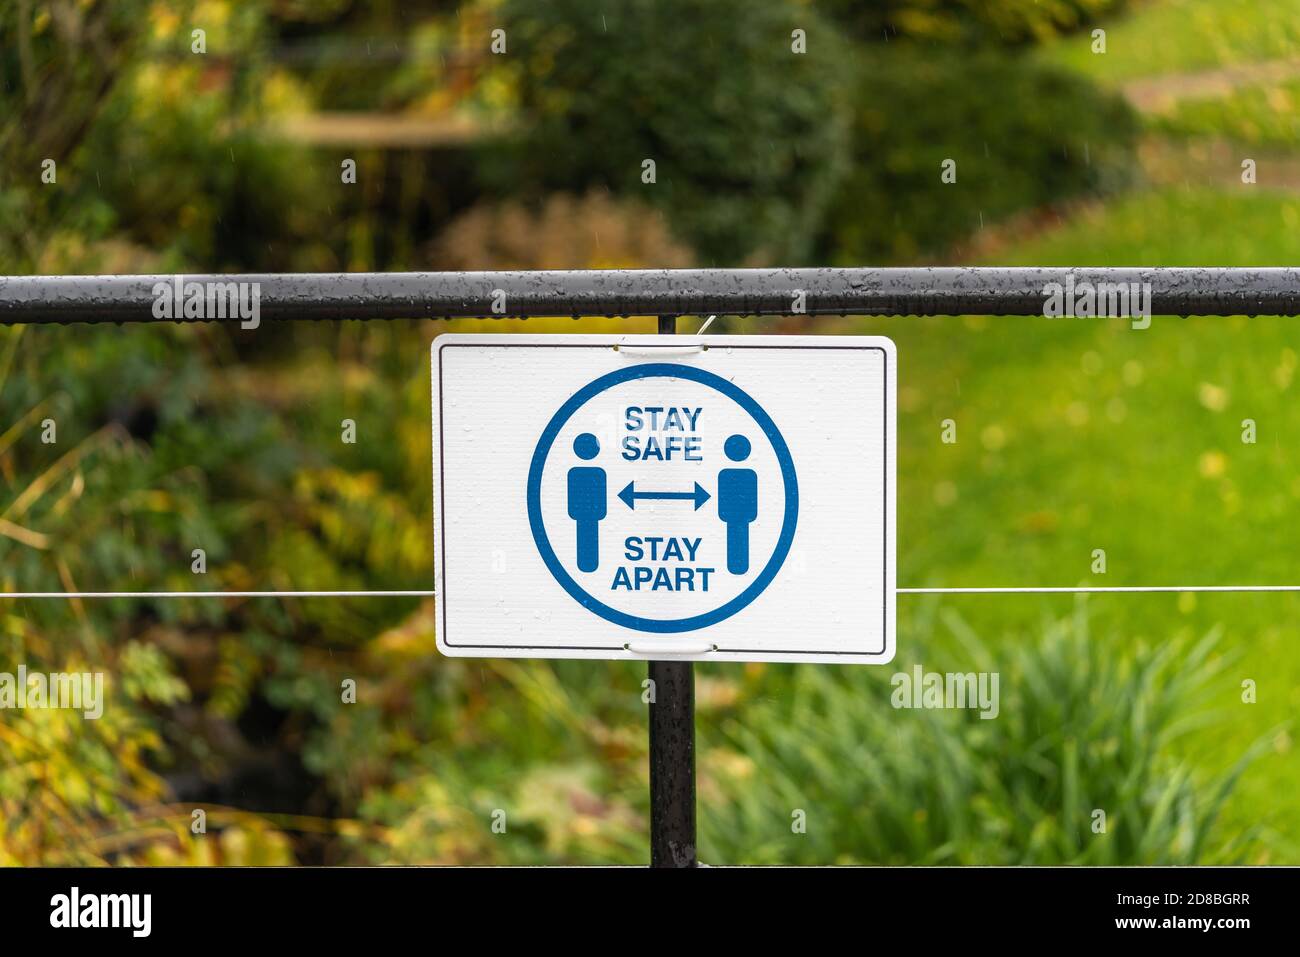 A 'Stay safe stay apart' sign on a rainy day -  Covid 19 social distancing measures at the University of Southampton October 2020, England, UK Stock Photo